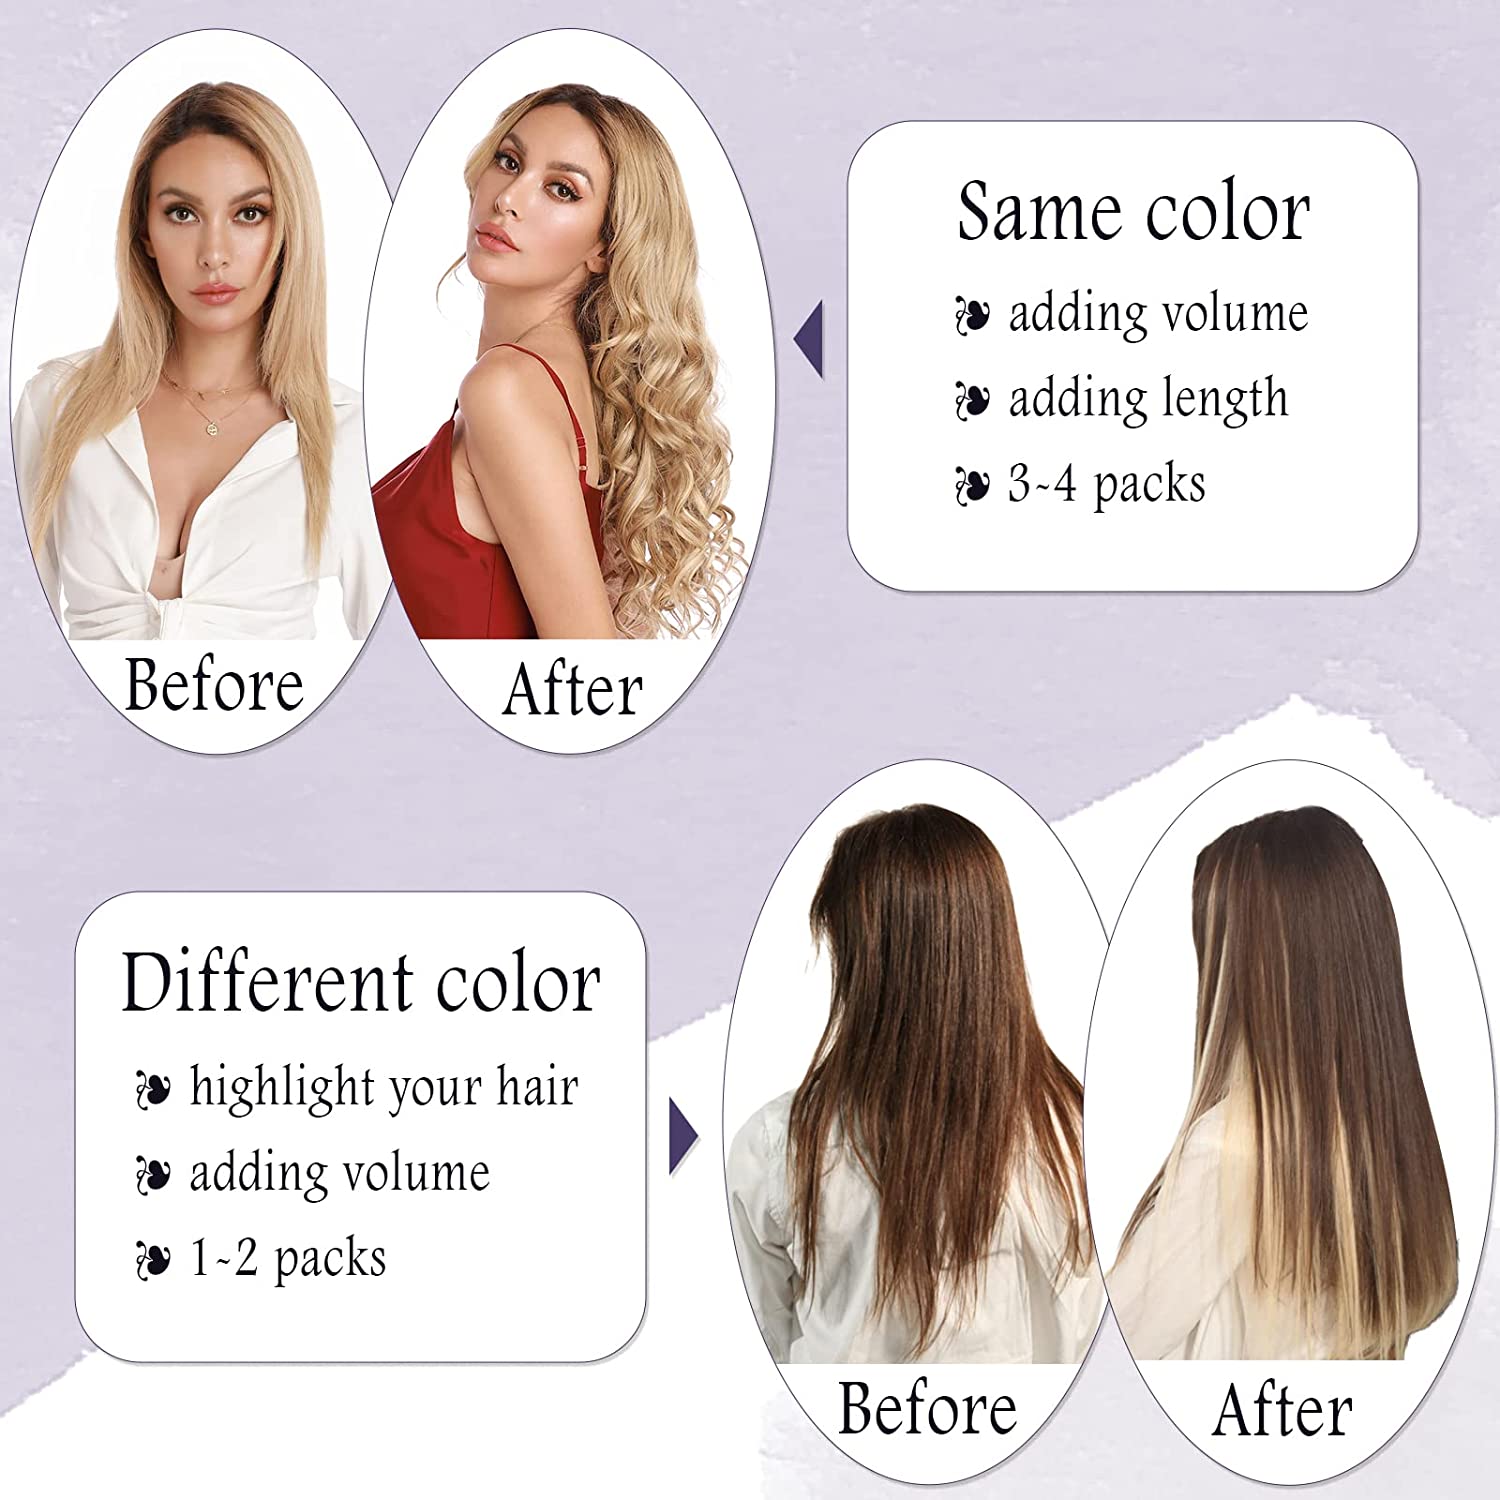 DESCRIPTION Pack 100 Strands Style Straight Application Time 2 - 3 Hours (Approx.) Life 6 - 12 Months Weight 1.0g/strand Fiber 100% Remy Human Hair Note 200-300 strands are recommended for full head. Usage Flat iron, wash and dry, curl available, but the hair color can not be dyed light.